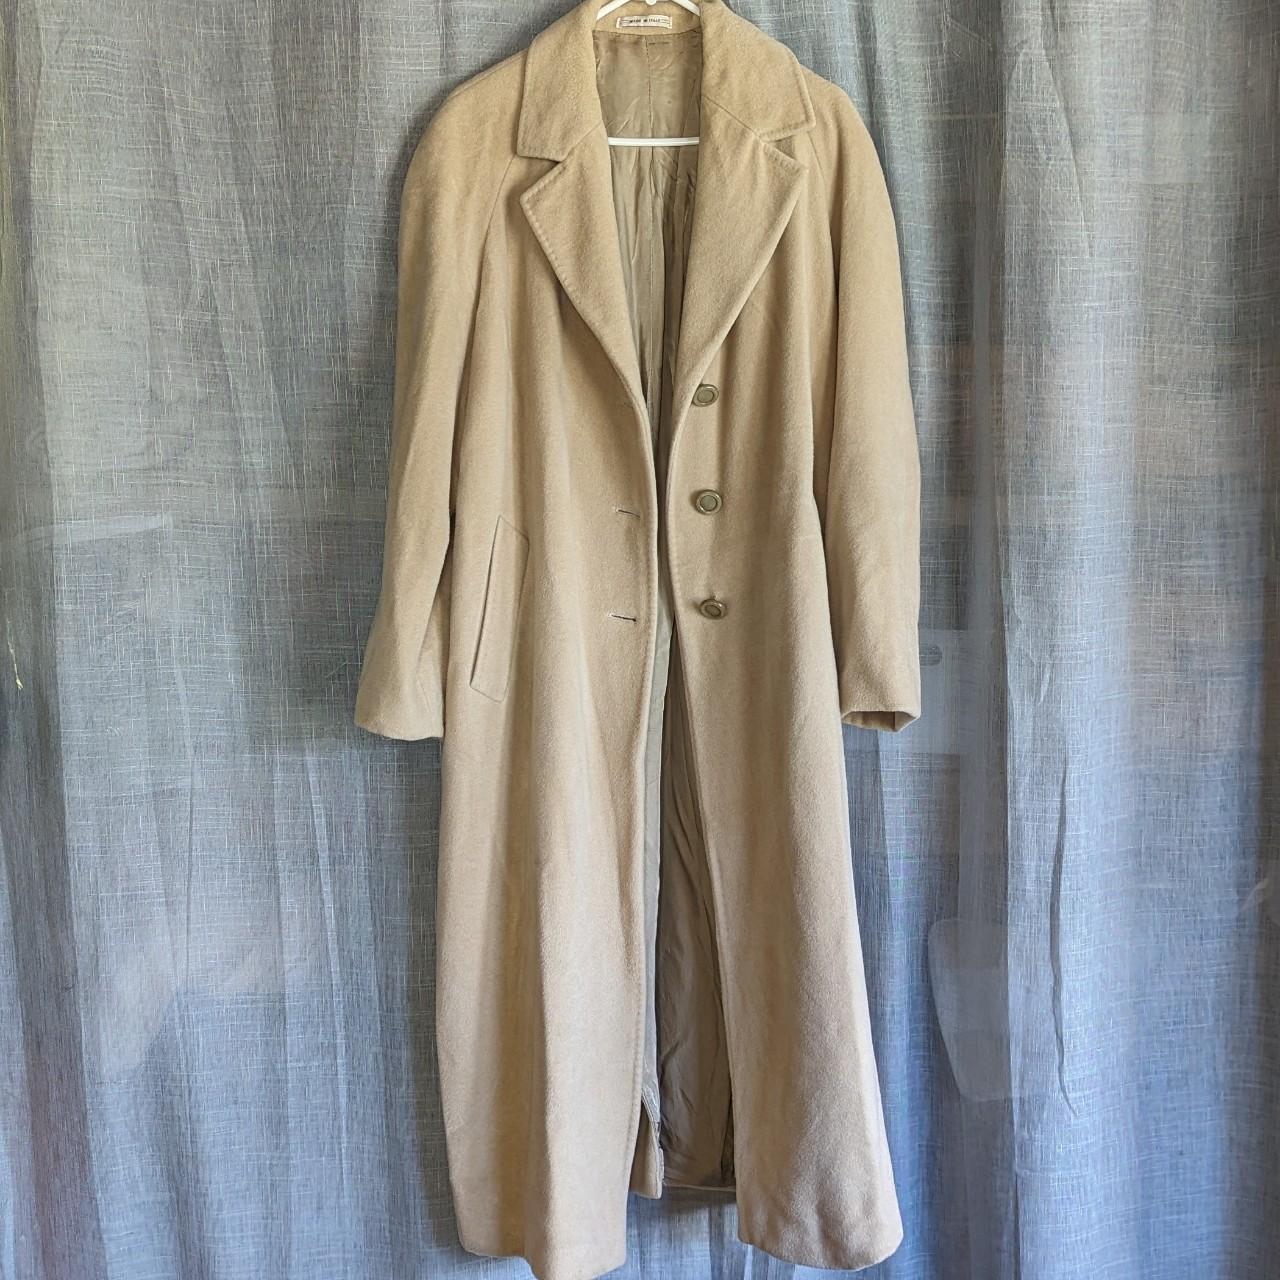 Vintage 100% Wool Coat Made in Italy The softest... - Depop